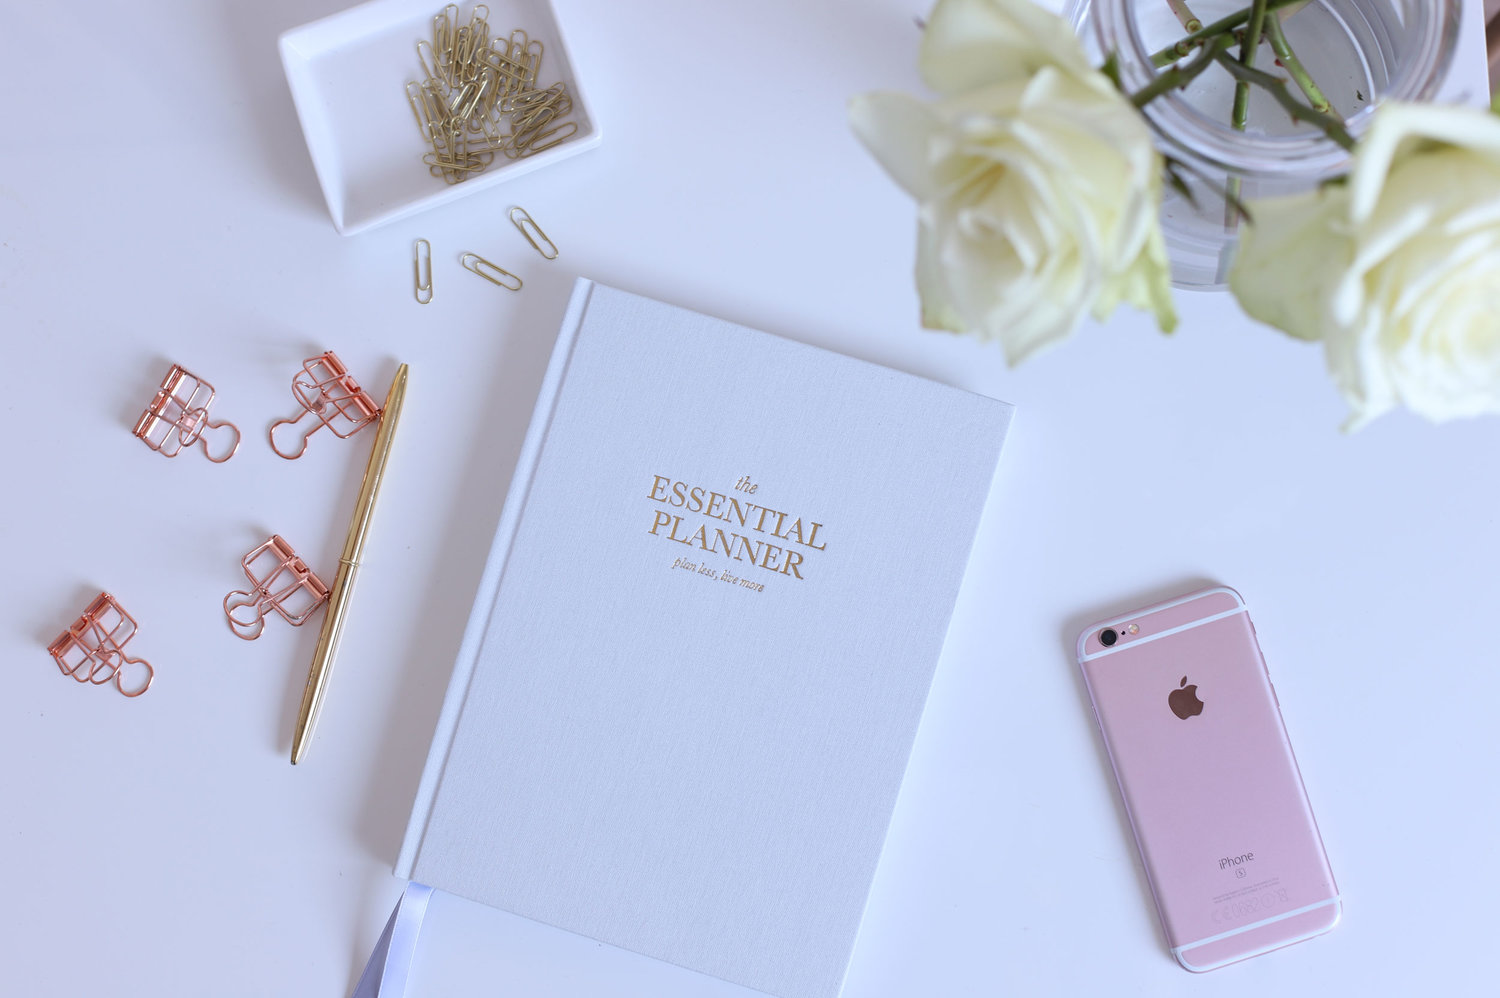 BUY THE ESSENTIAL PLANNER HERE